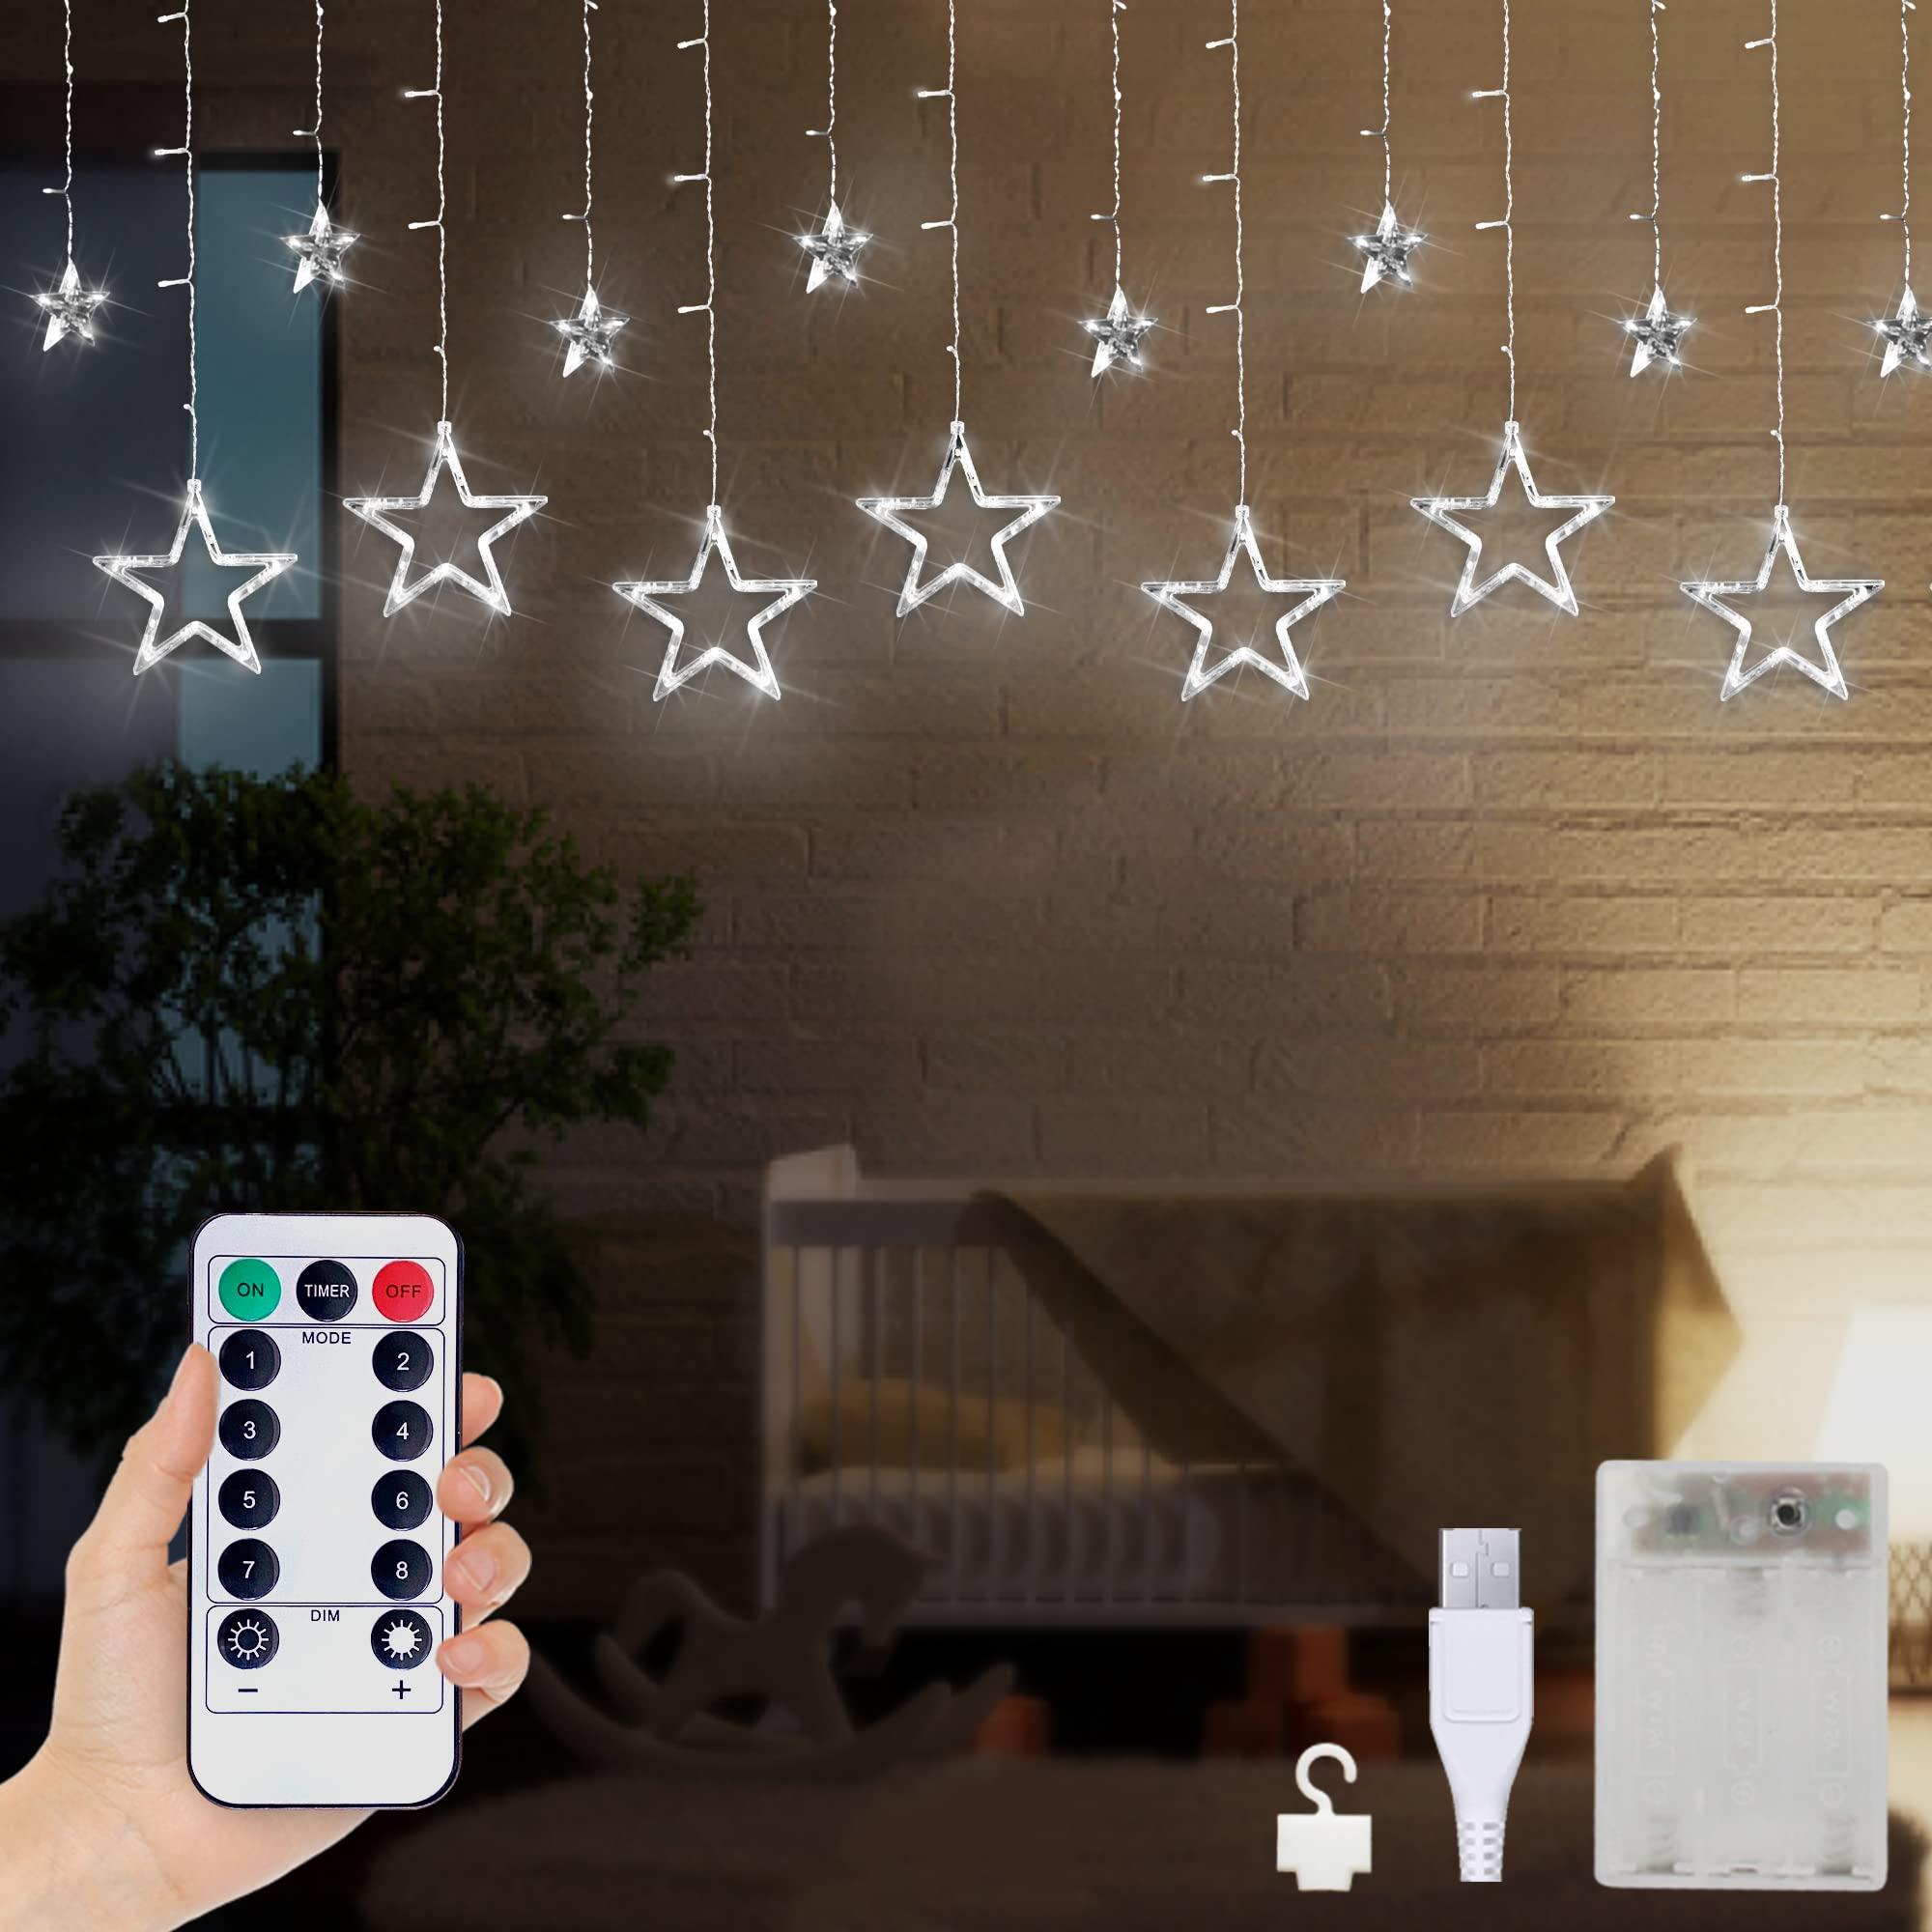 12 Star Curtain Lights with Remote Control 138 LEDs Fairy Light 8 Lighting Modes USB Powered for Bedroom Garden Party Wedding Christmas, Ideale Gift for Family Friends (Cold White) 1